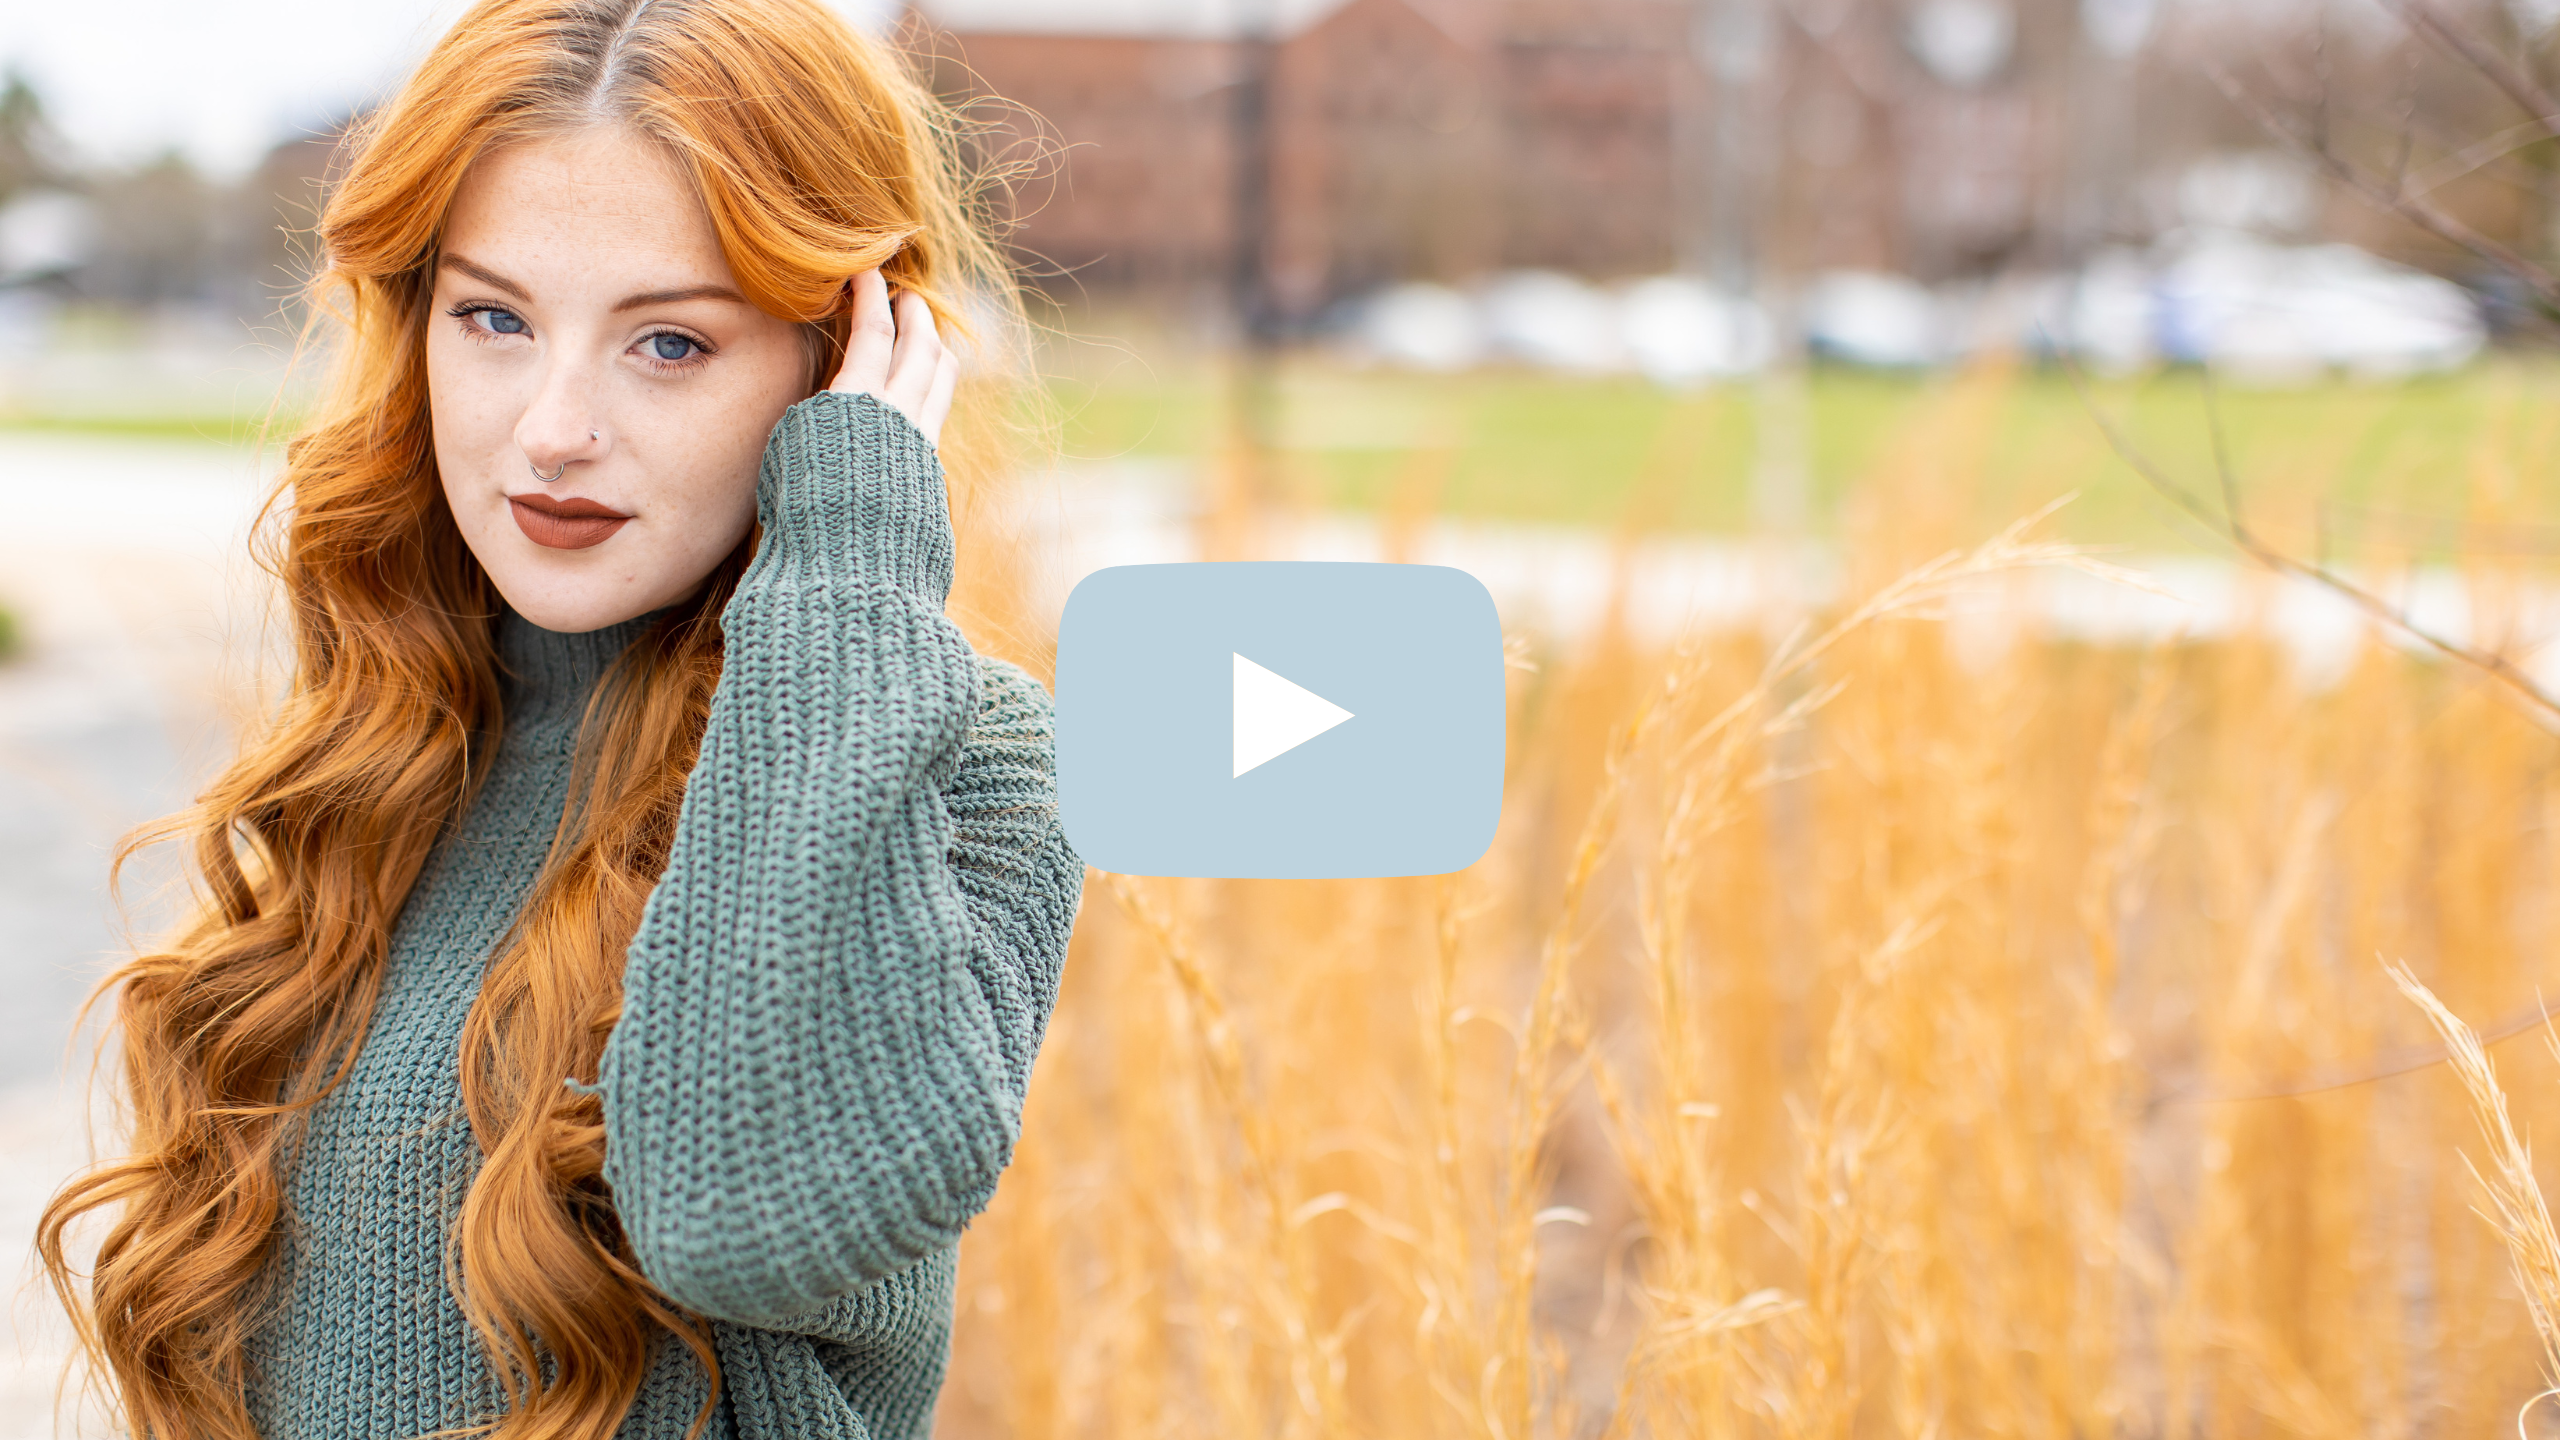 How to Pose People That Aren’t Models | Hope Taylor Photography